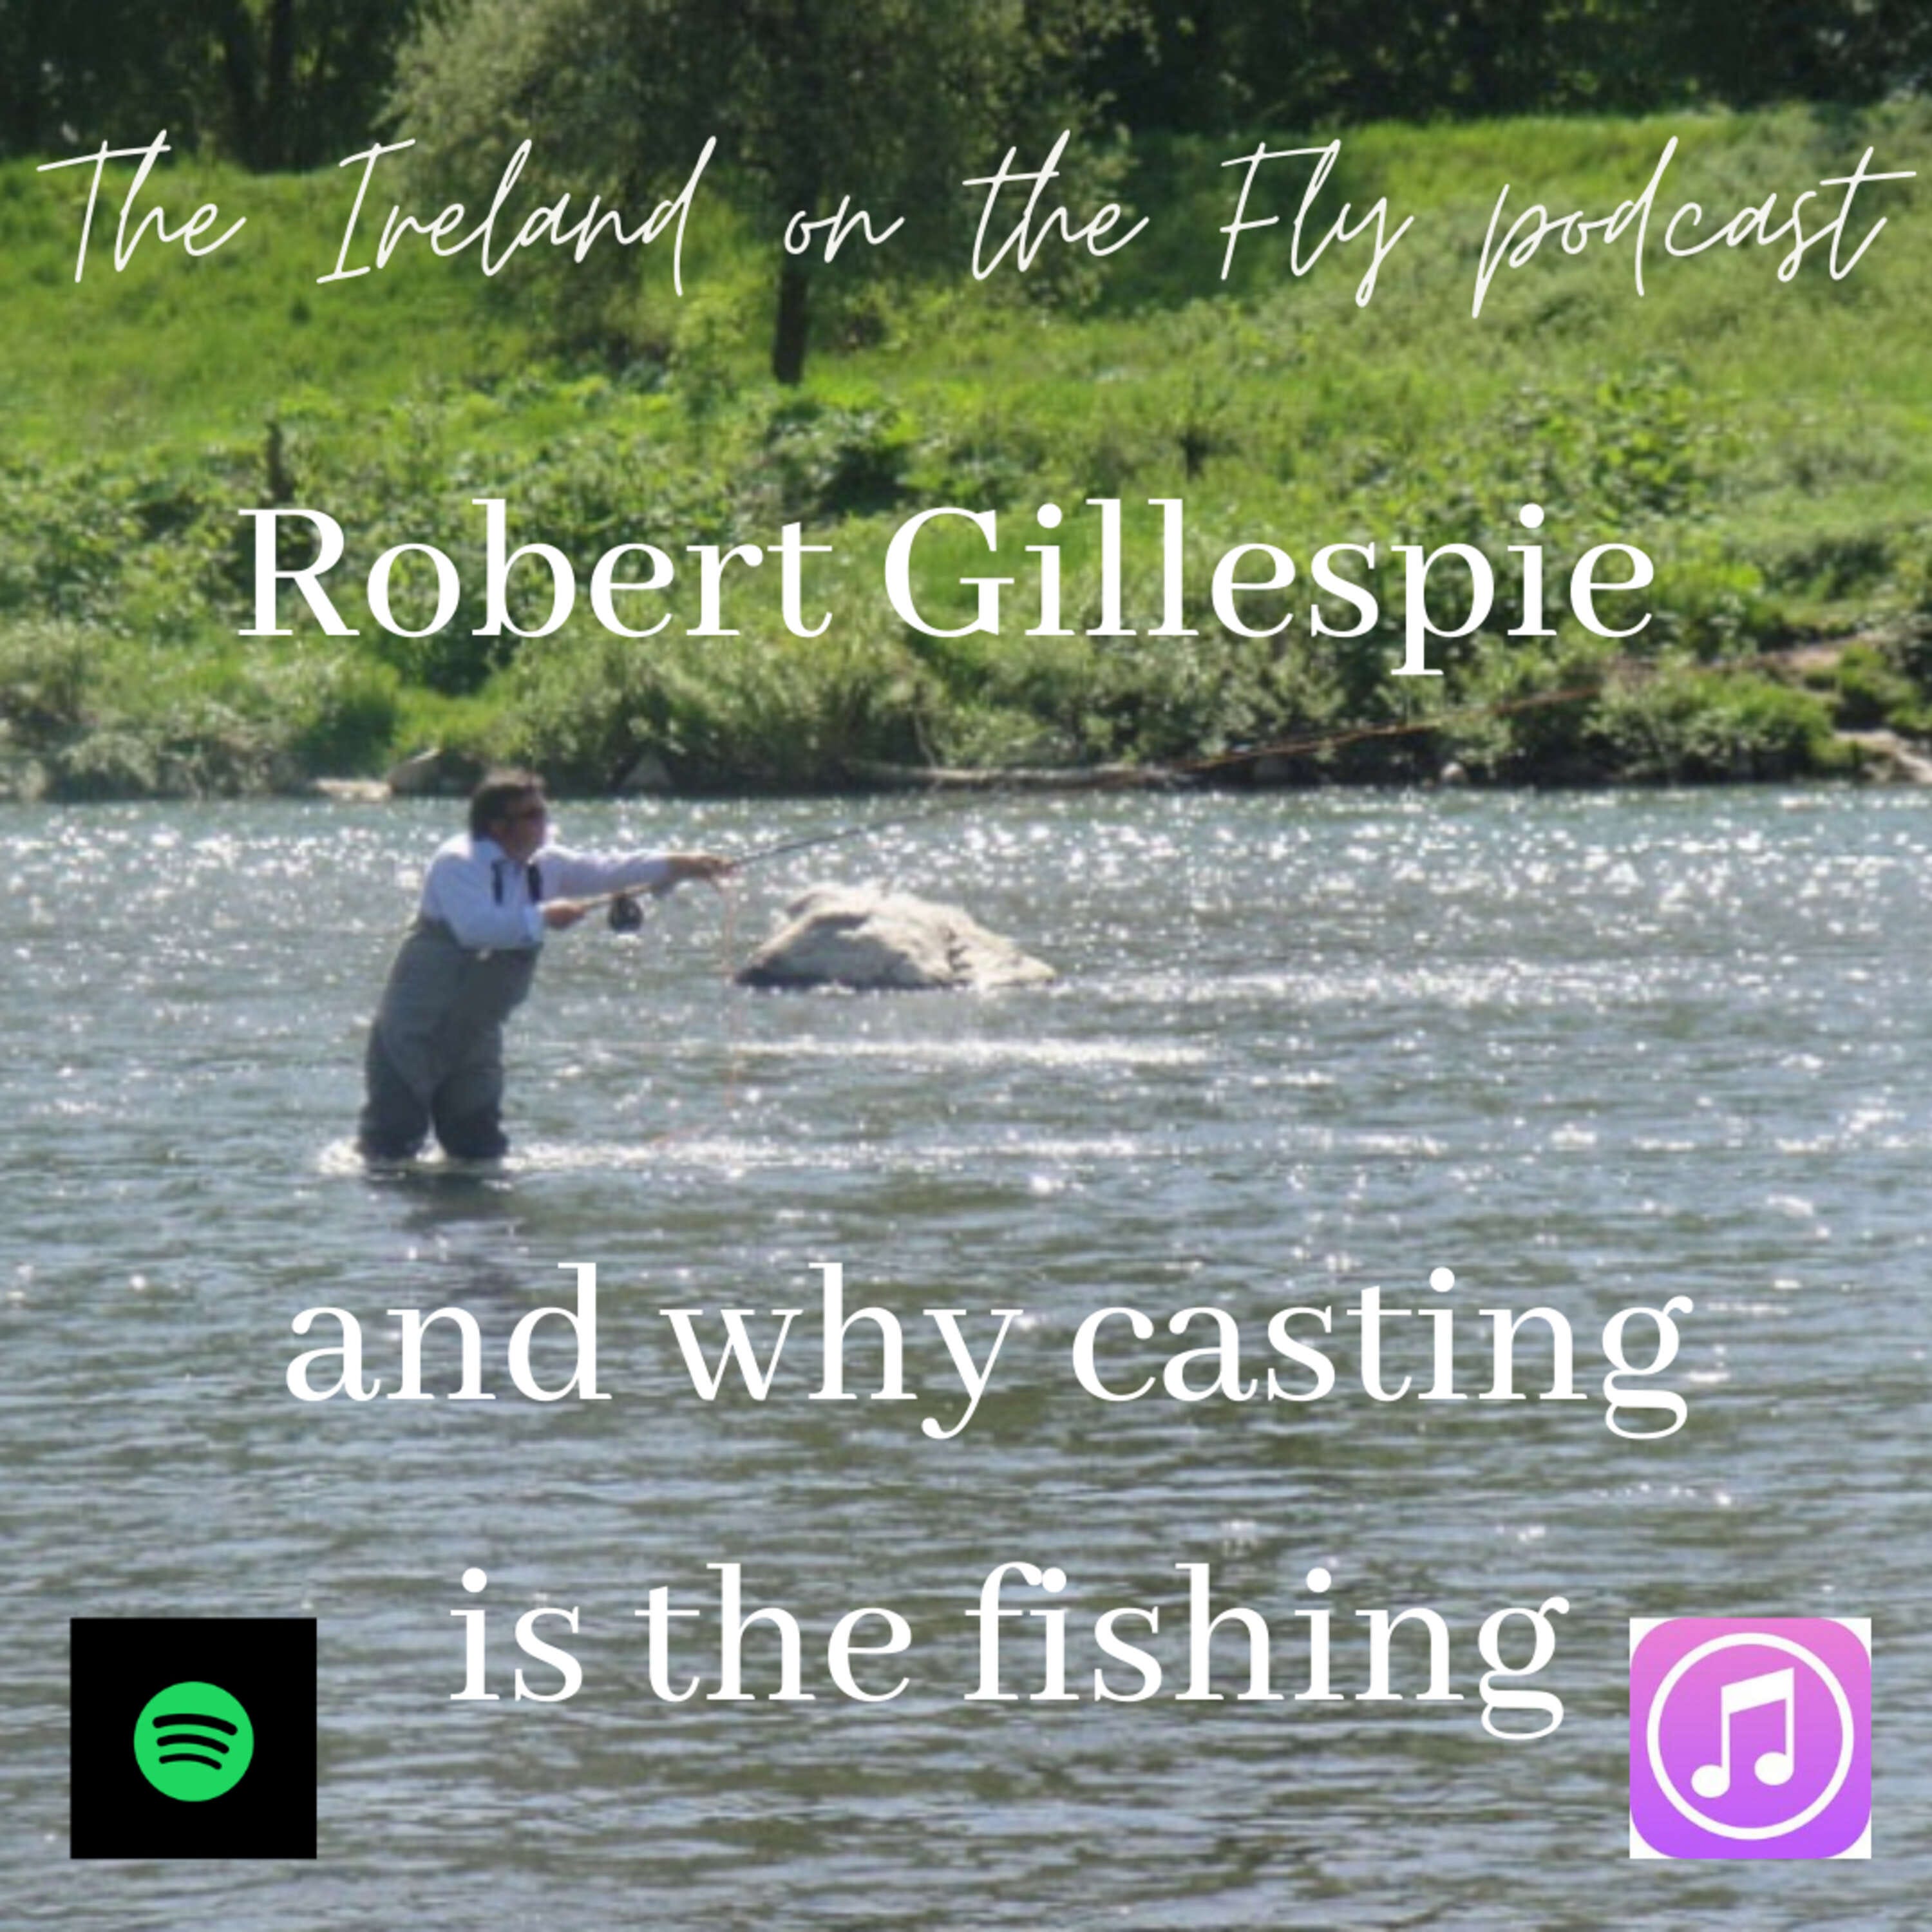 Robert Gillespie and why casting is the fishing – Ireland on the